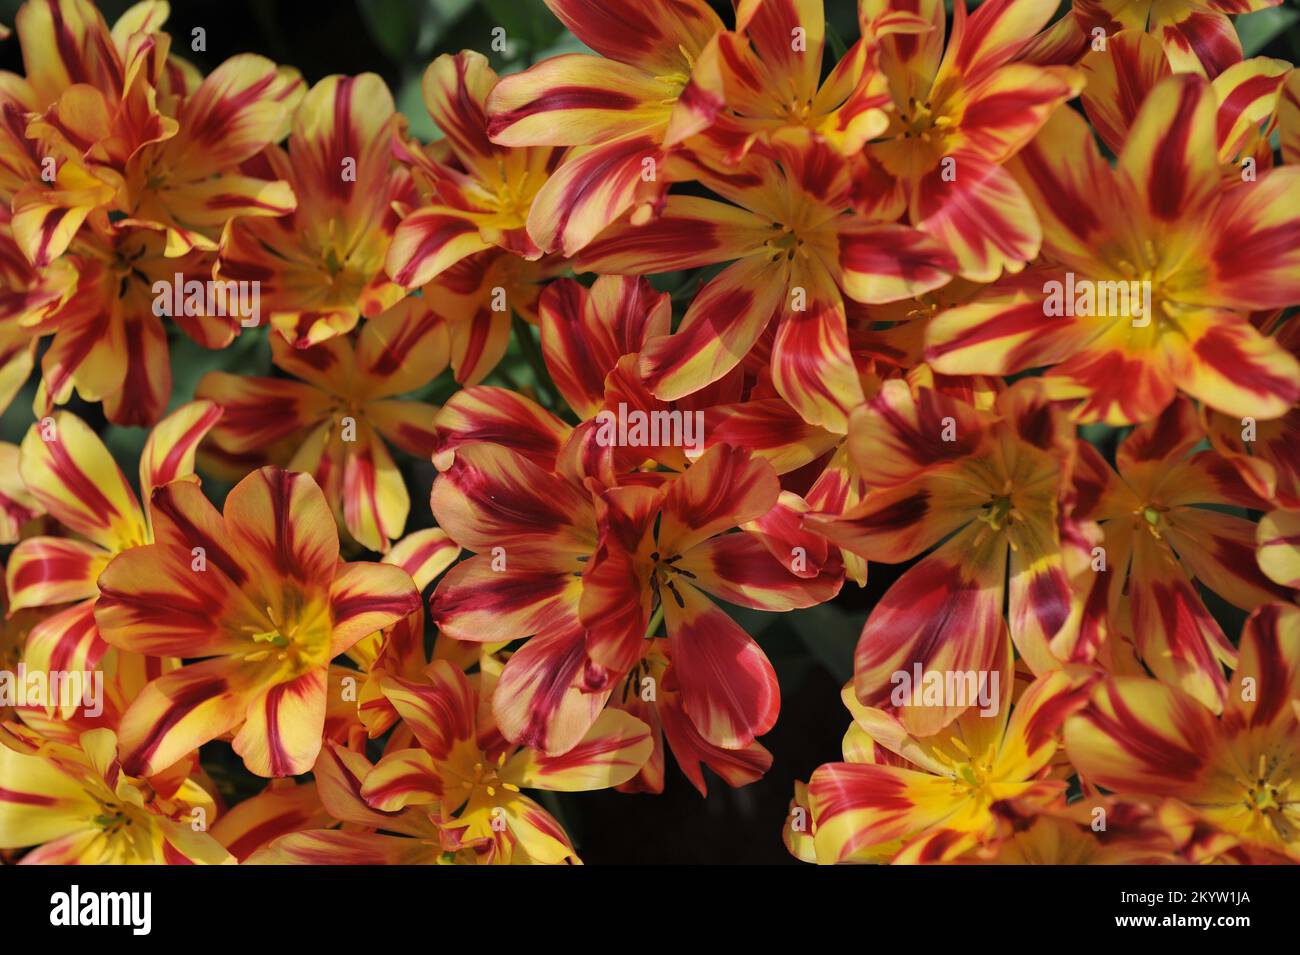 Red and yellow multi-flowered Single Late tulips (Tulipa) Wonder Club bloom in a garden in April Stock Photo